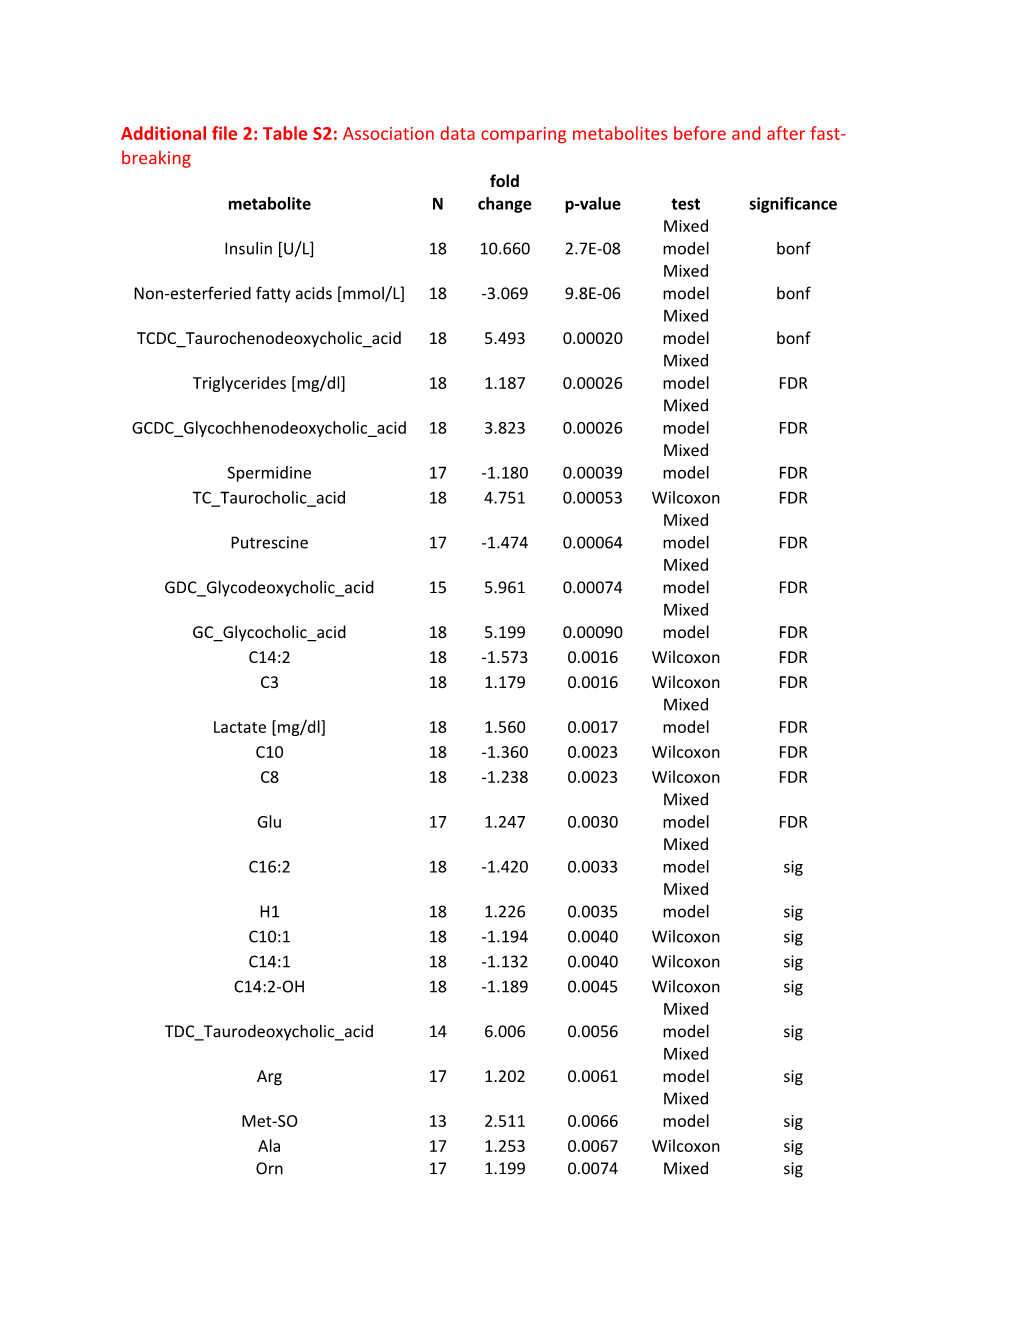 Additional File 2: Table S2: Association Data Comparing Metabolites Before and After